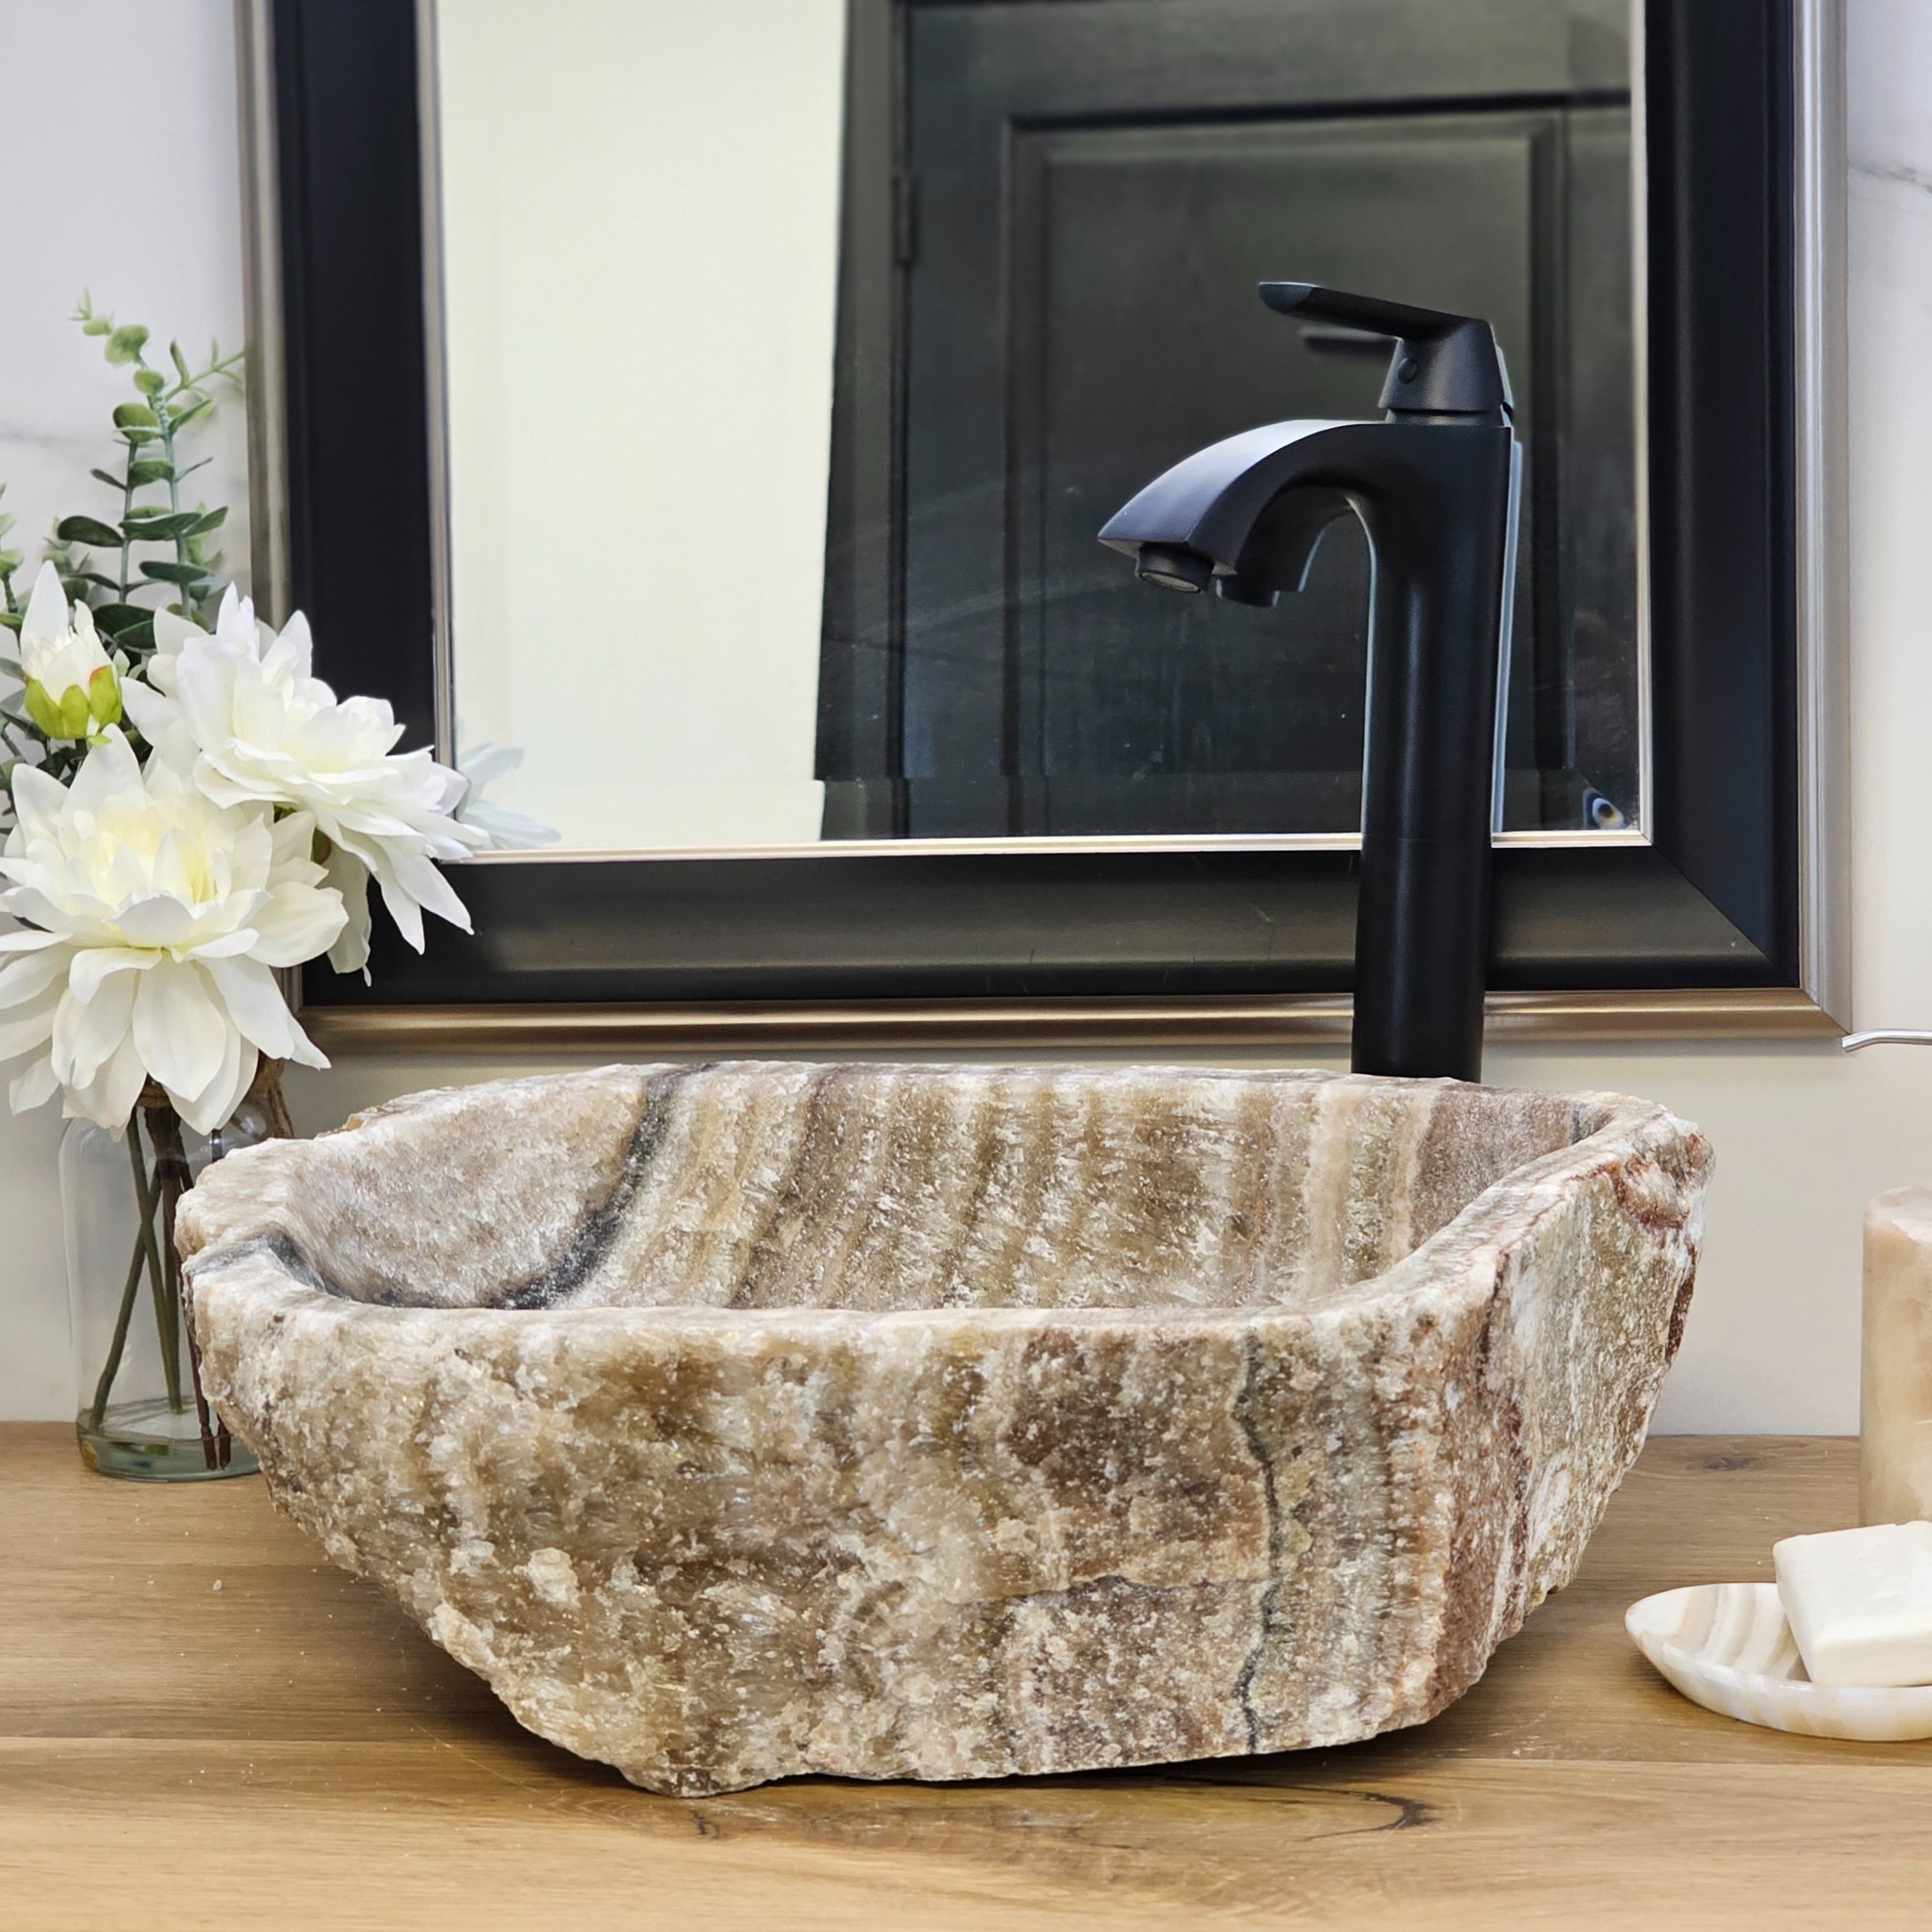 Brown and Tan Onyx Vessel Sink. A beautiful work of art. We offer fast shipping. Handmade in Mexico. We hand finish, package, and ship from the USA. Buy now at www.felipeandgrace.com. 